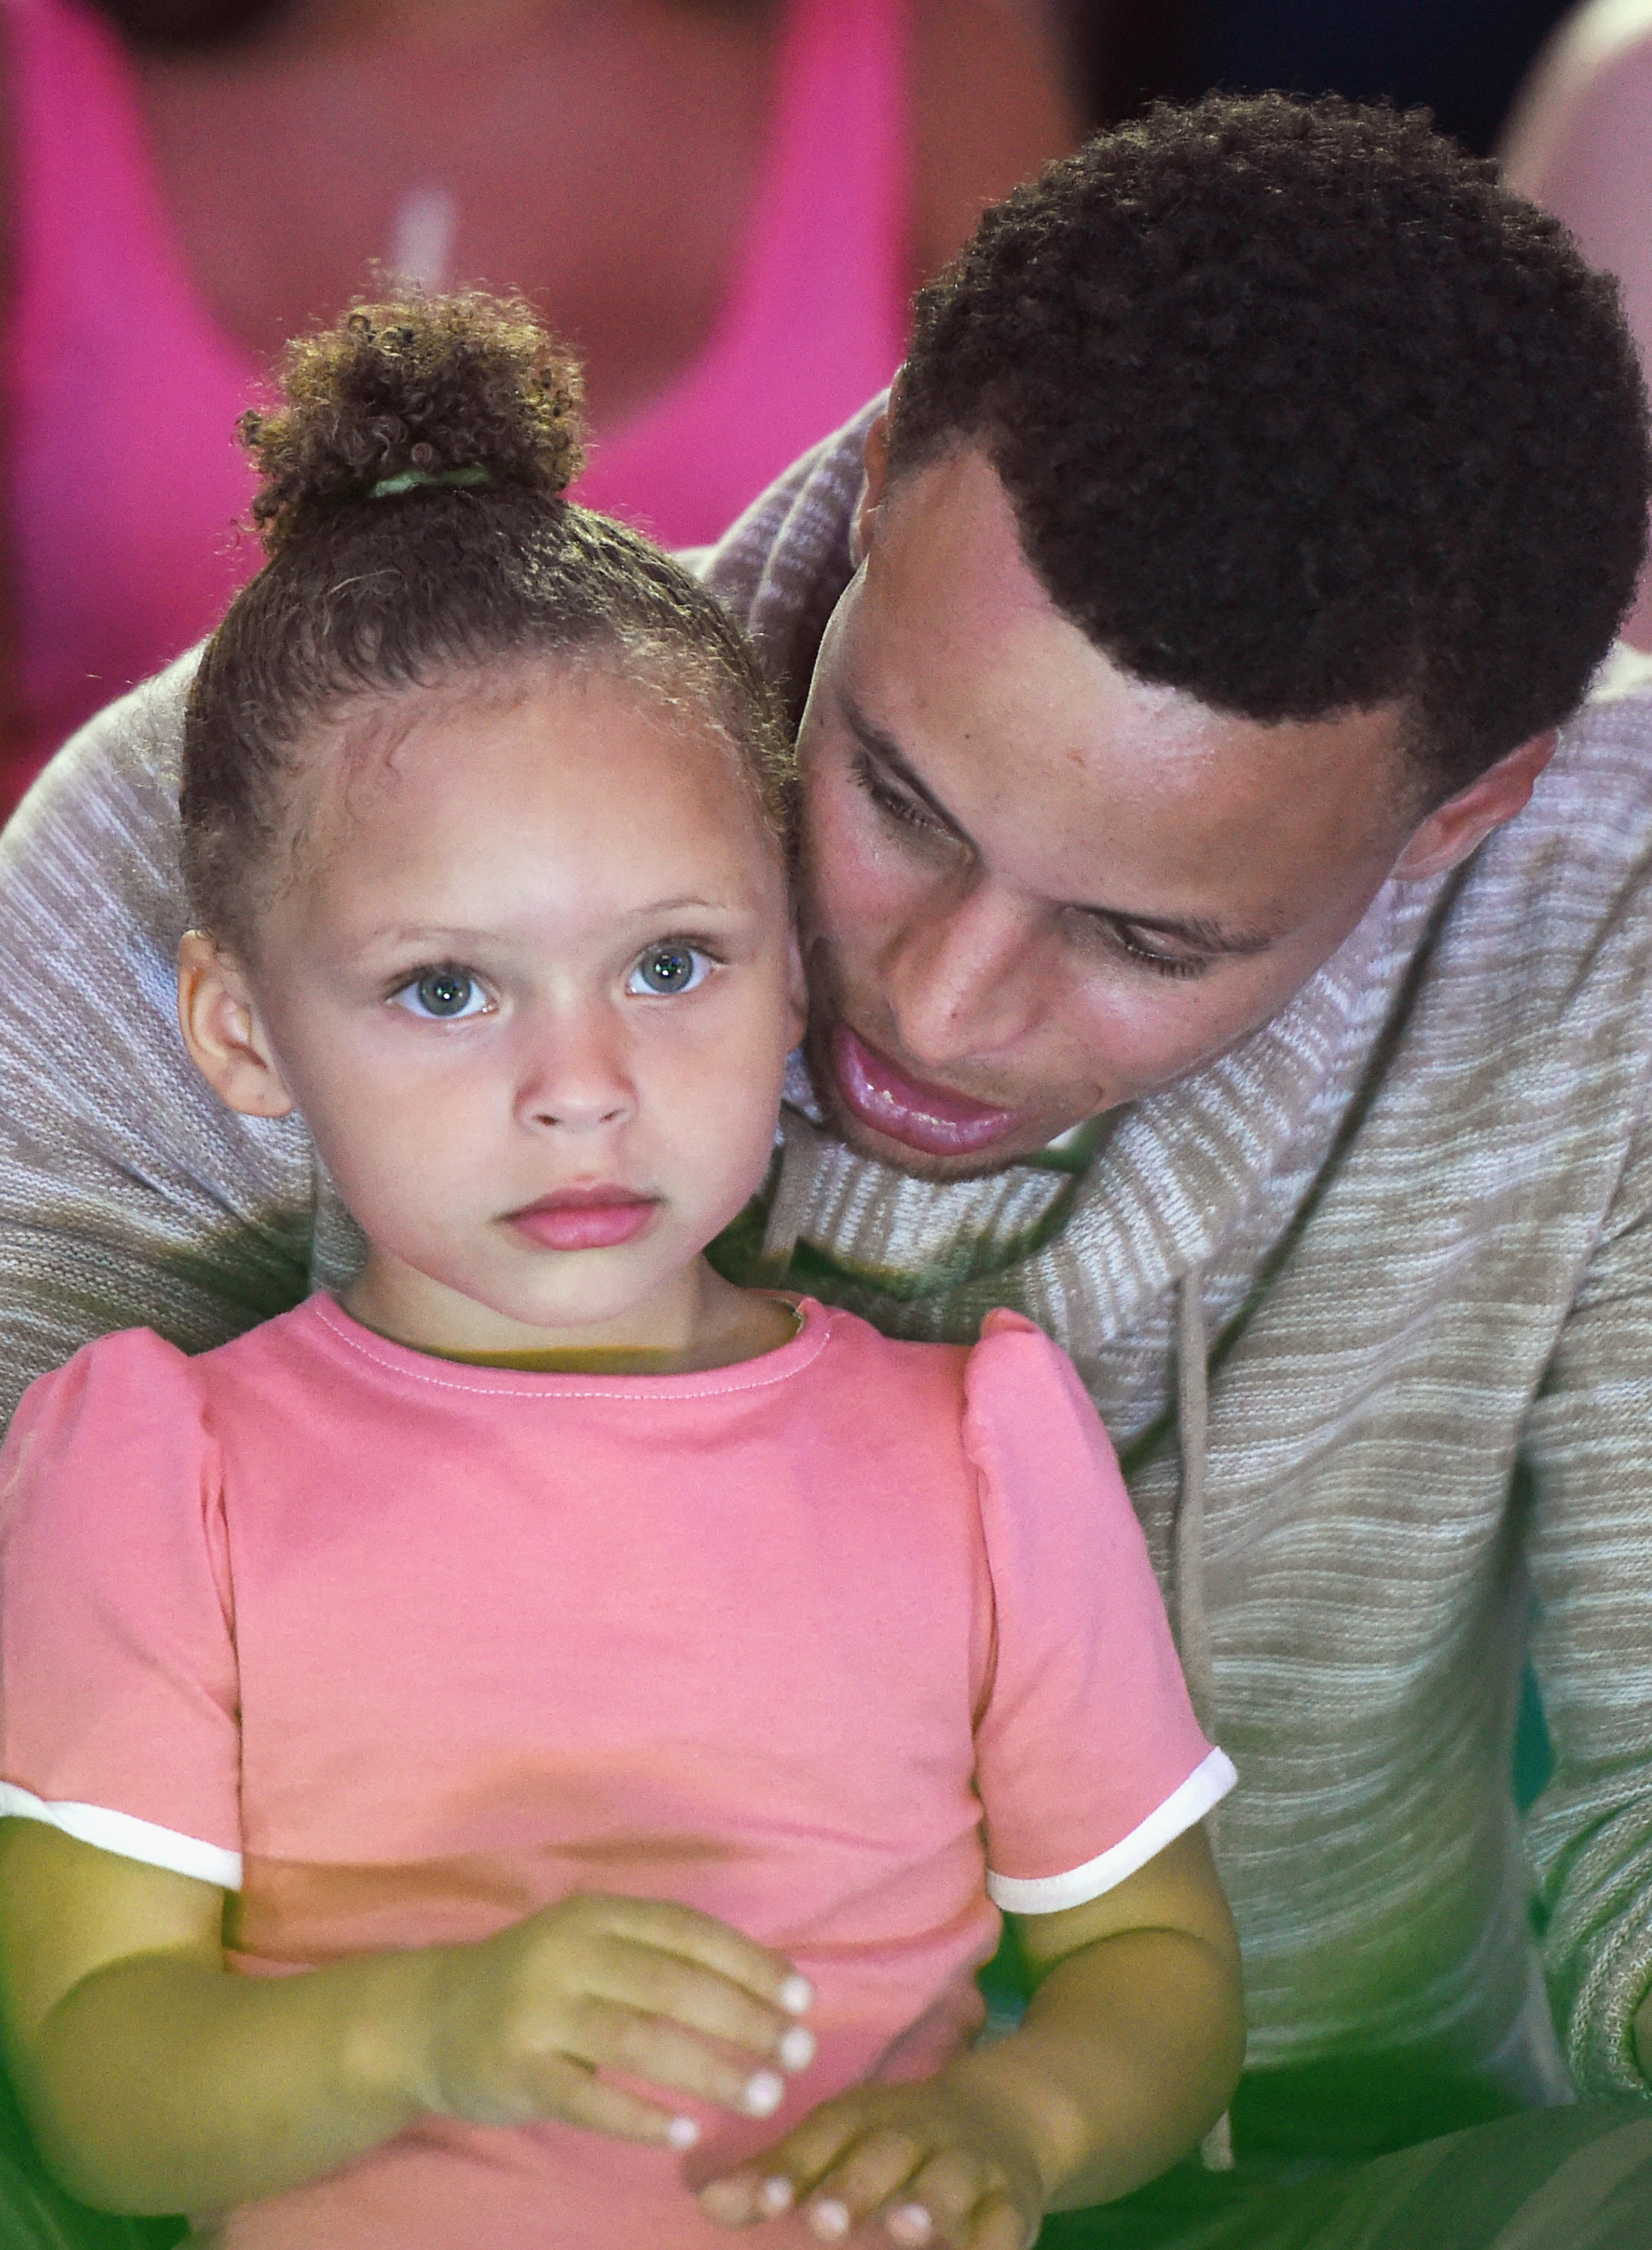 Stephen Curry Ayesha Curry Riley Curry Nickelodeon Kids Choice Sports Awards 2015